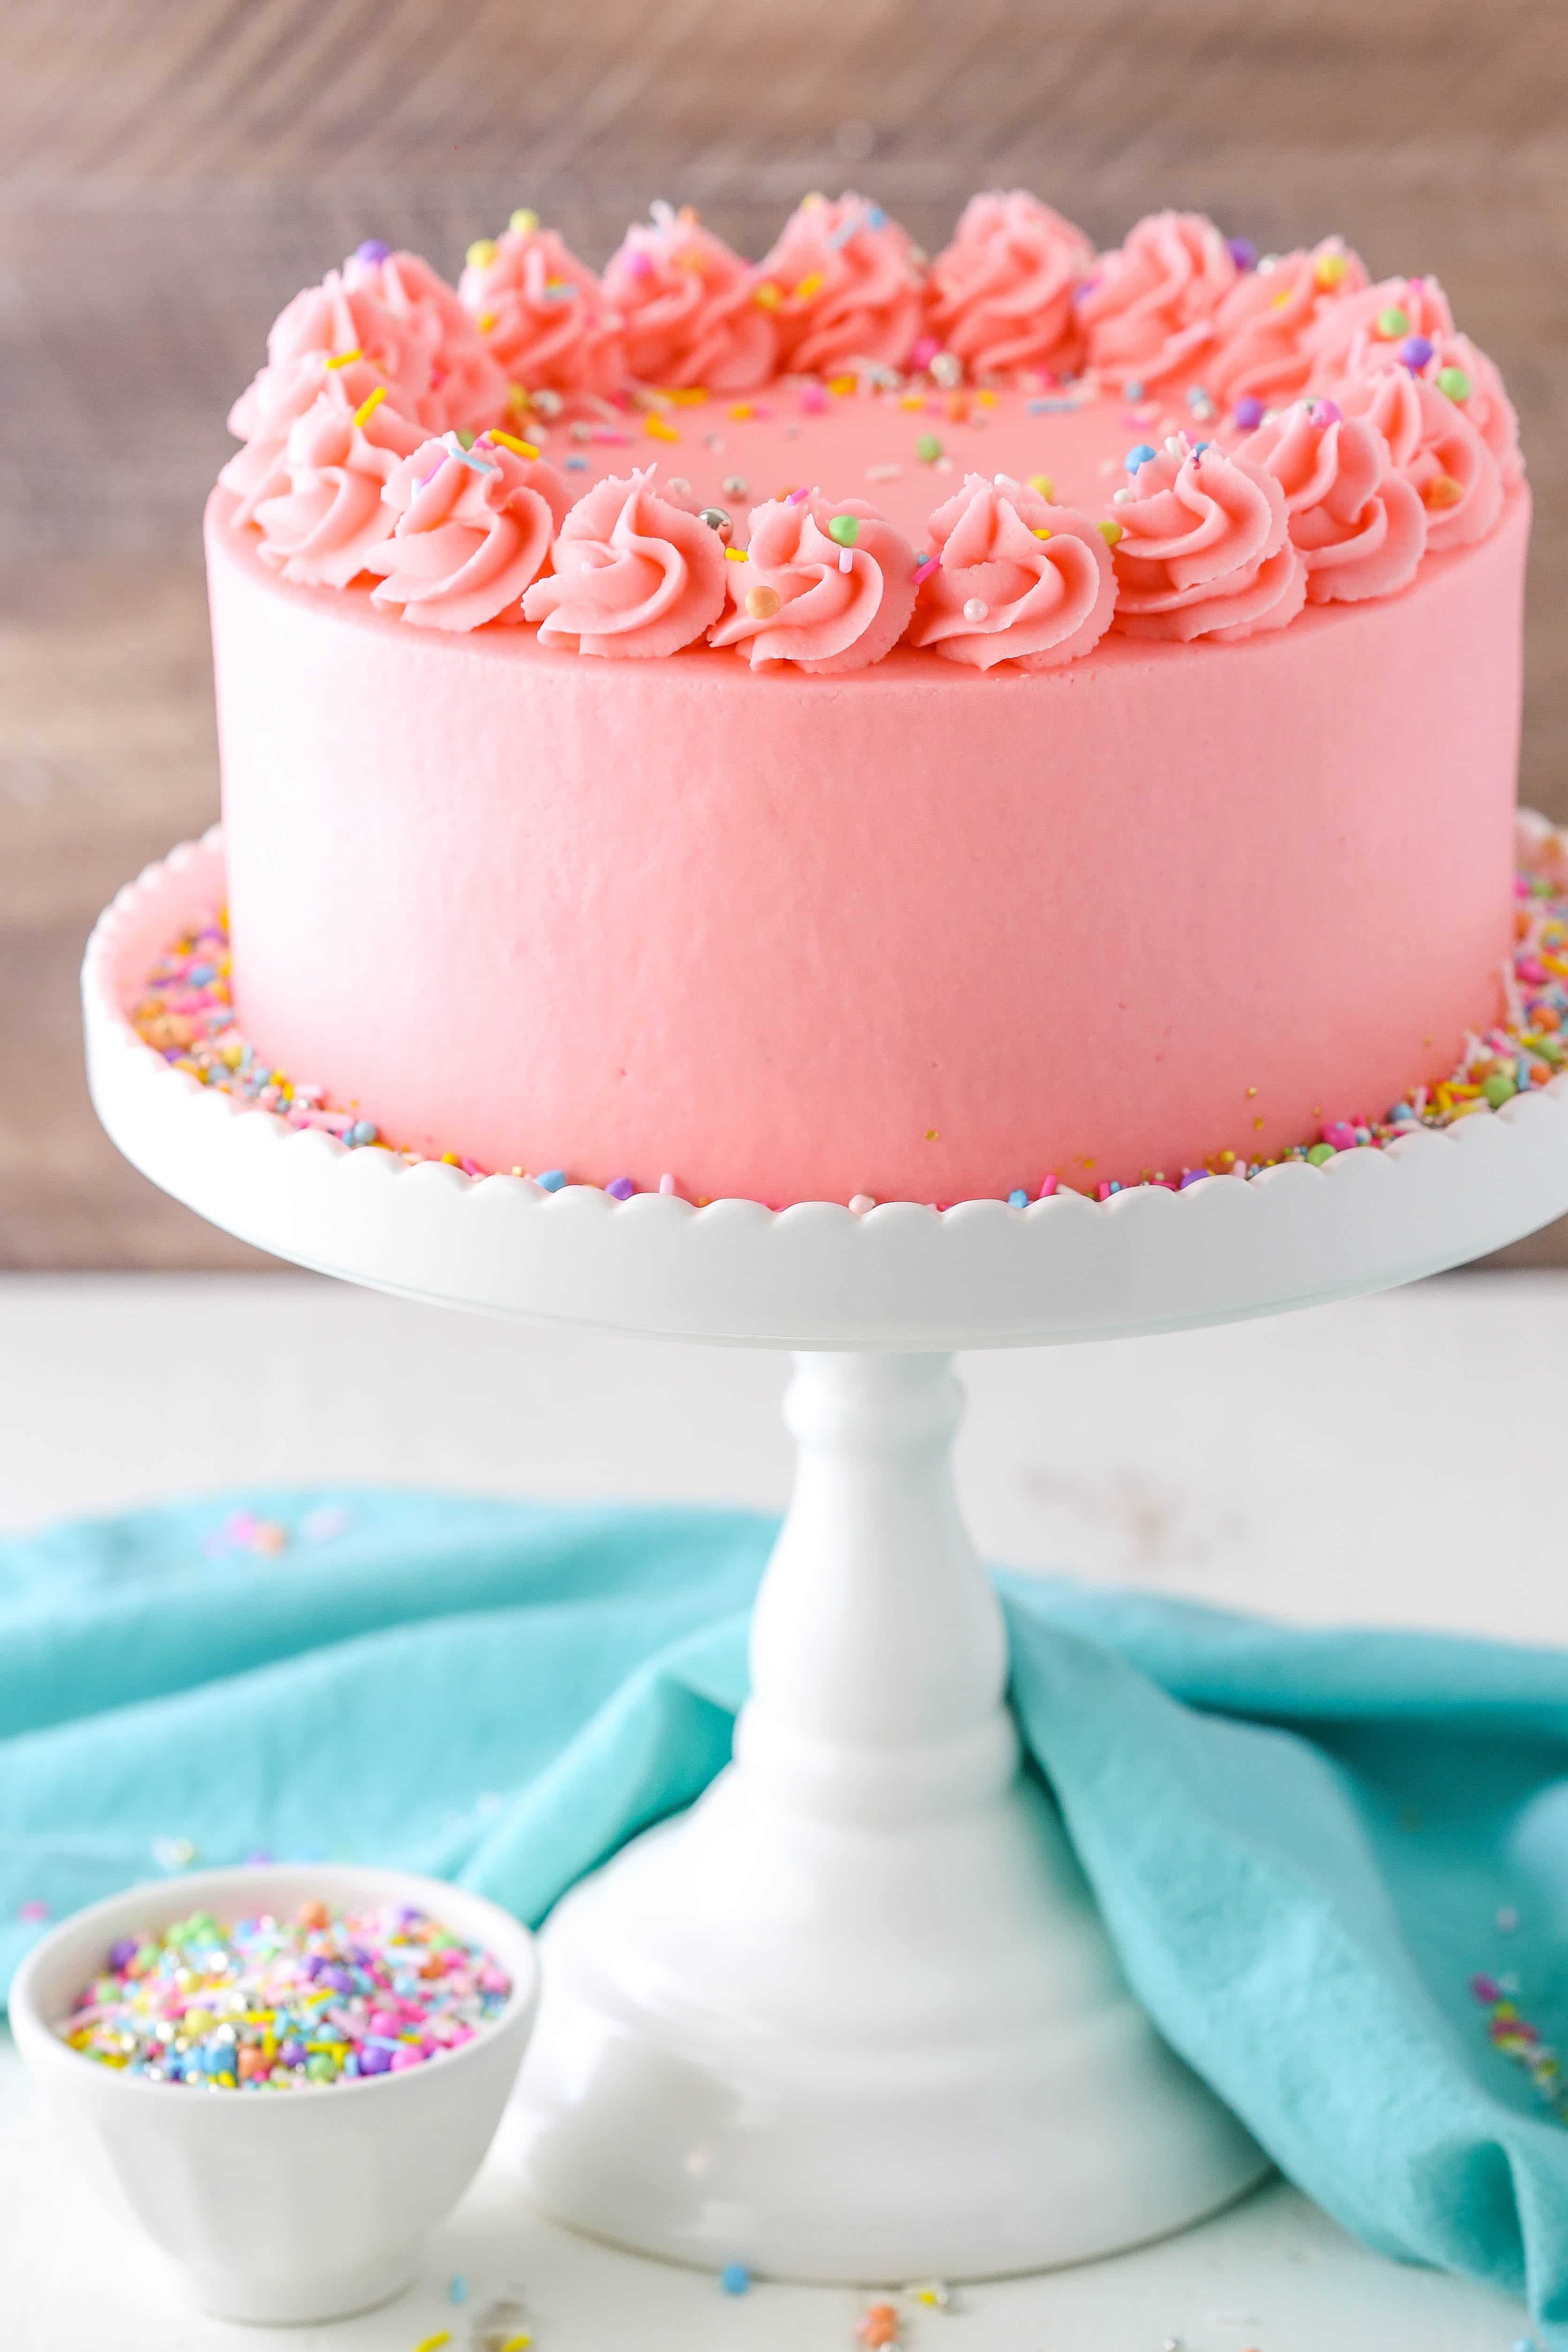 How To Frost A Cake With Buttercream Step By Step